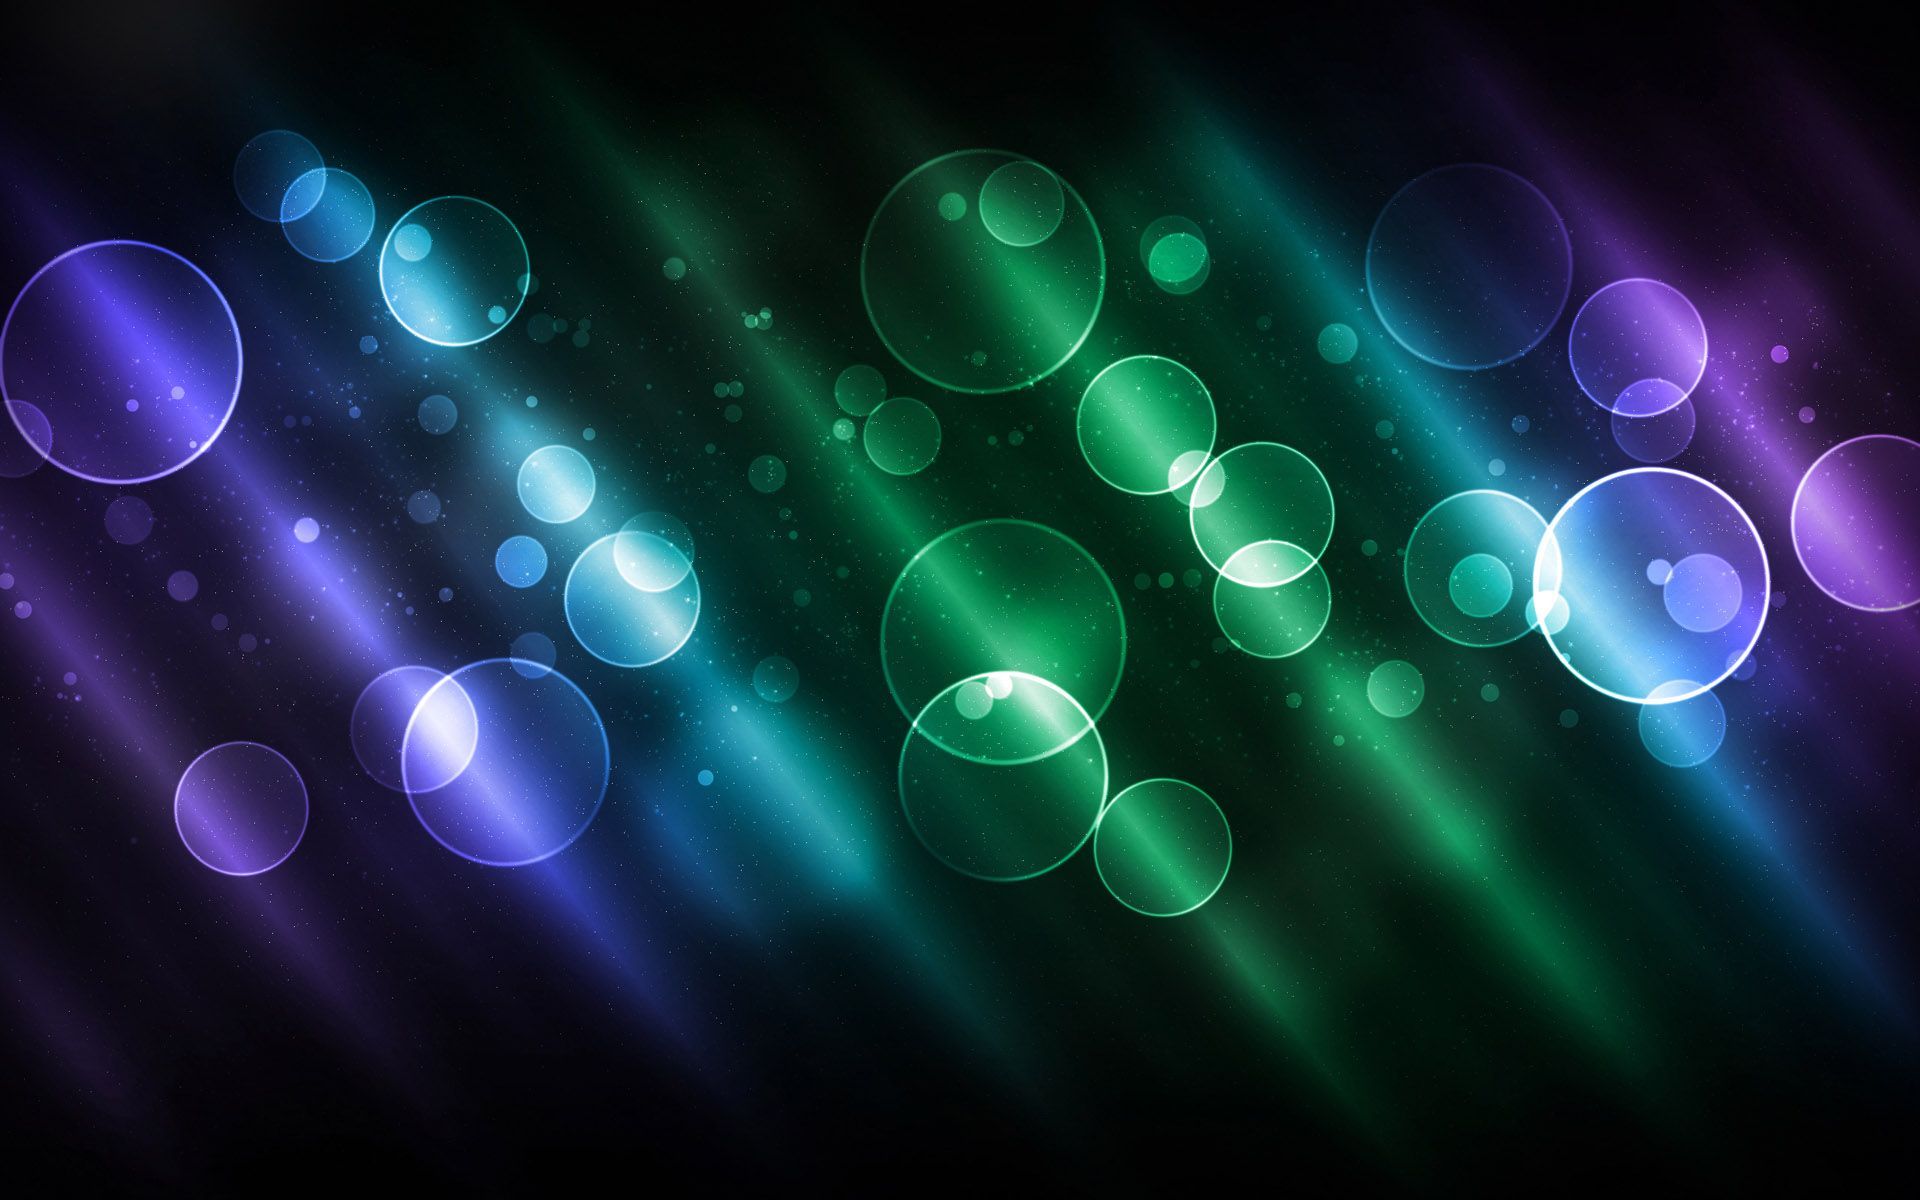 HD color background wallpaper 18527 - Background color theme ...